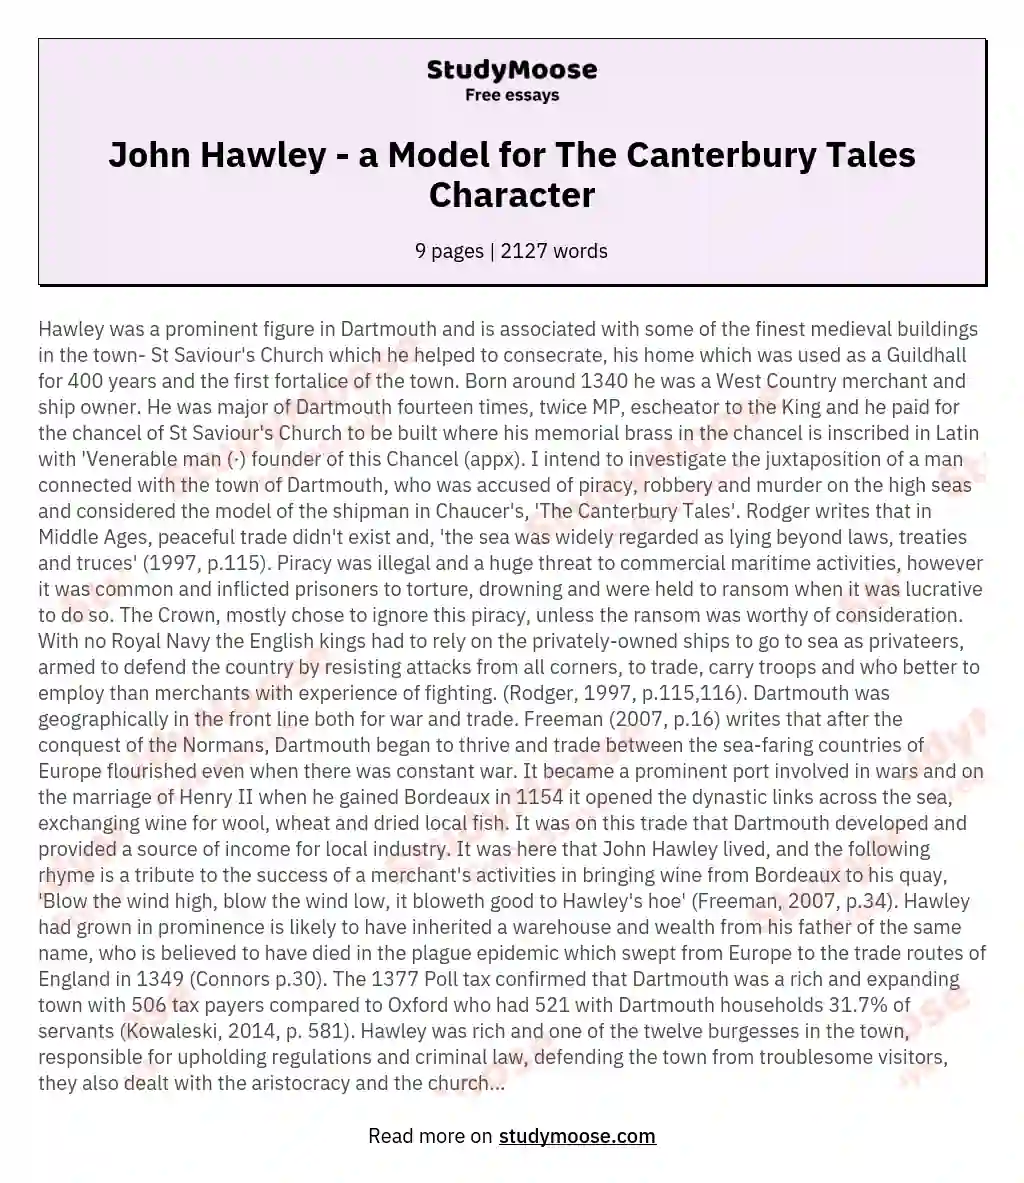 John Hawley - a Model for The Canterbury Tales Character essay